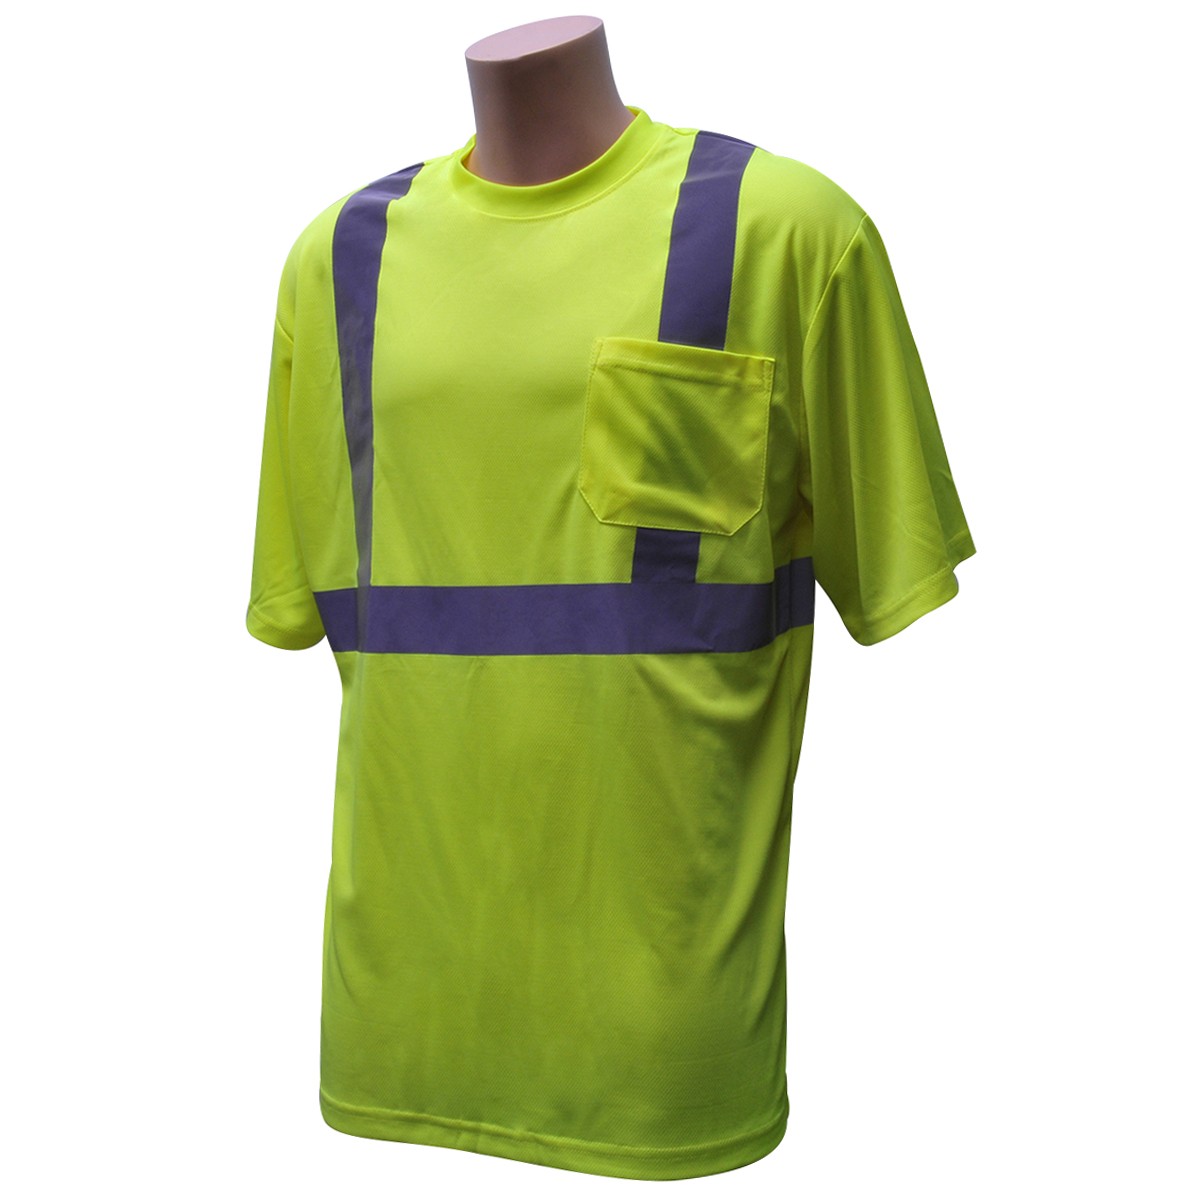 Bco Ss Pkt T W/Reflective Tape/Hivis/Lime L